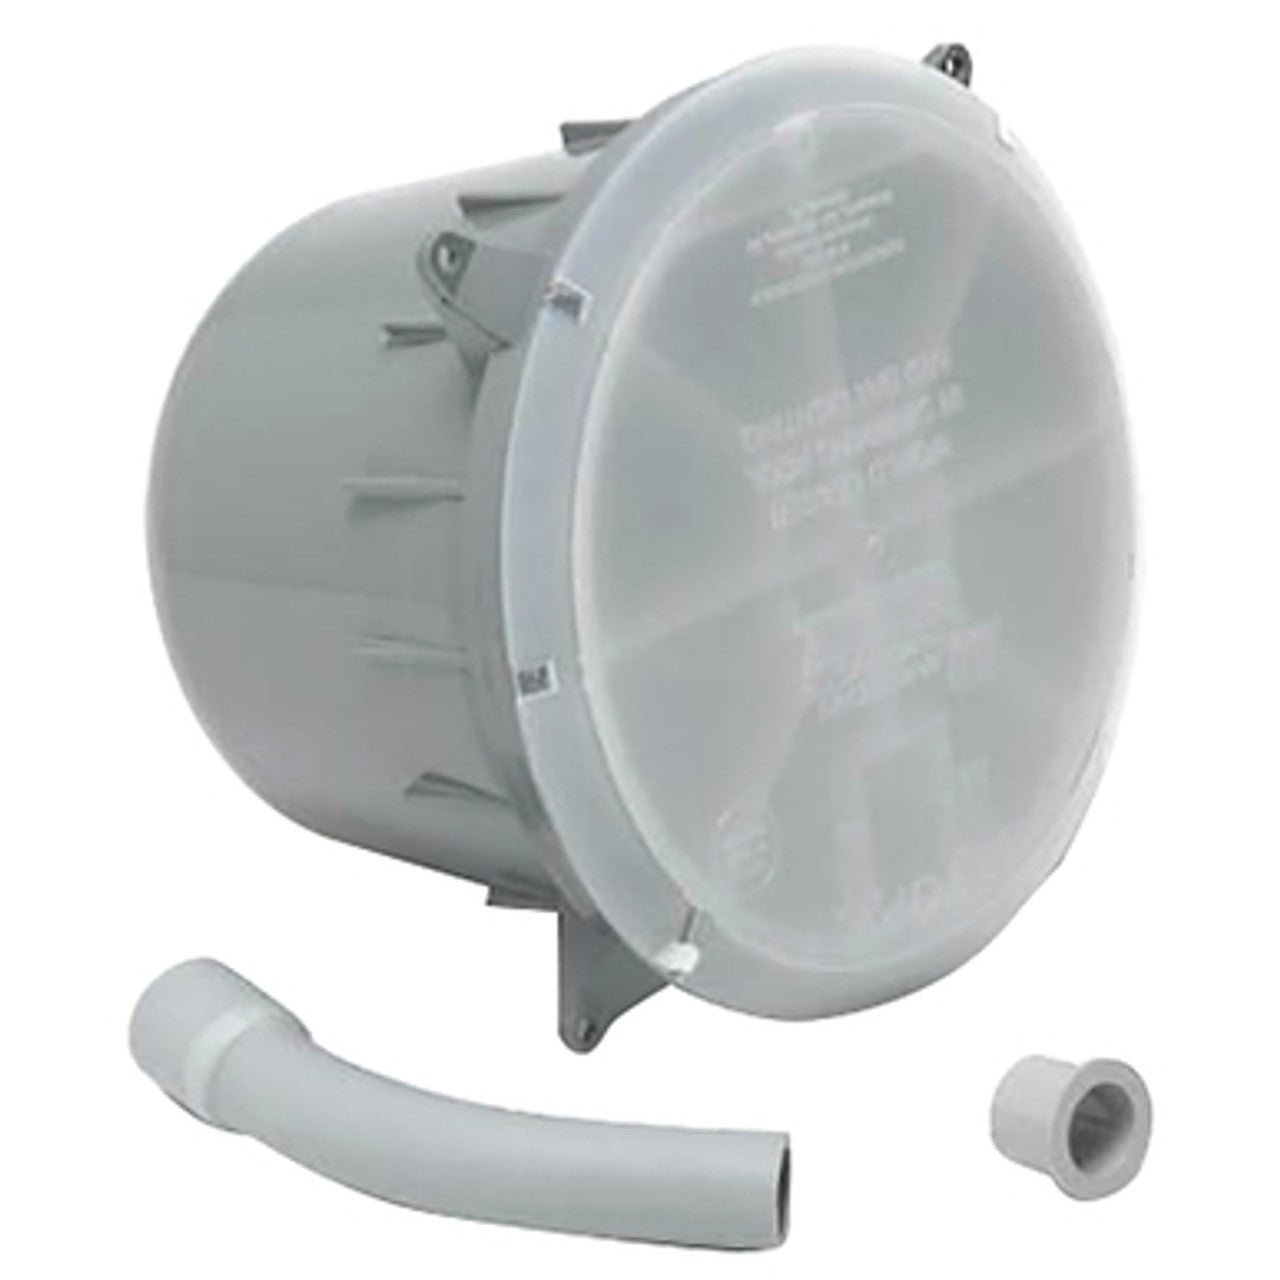 Pentair Large PVC Niche for Concrete Pools 79206700 - Pool Lights - img-3